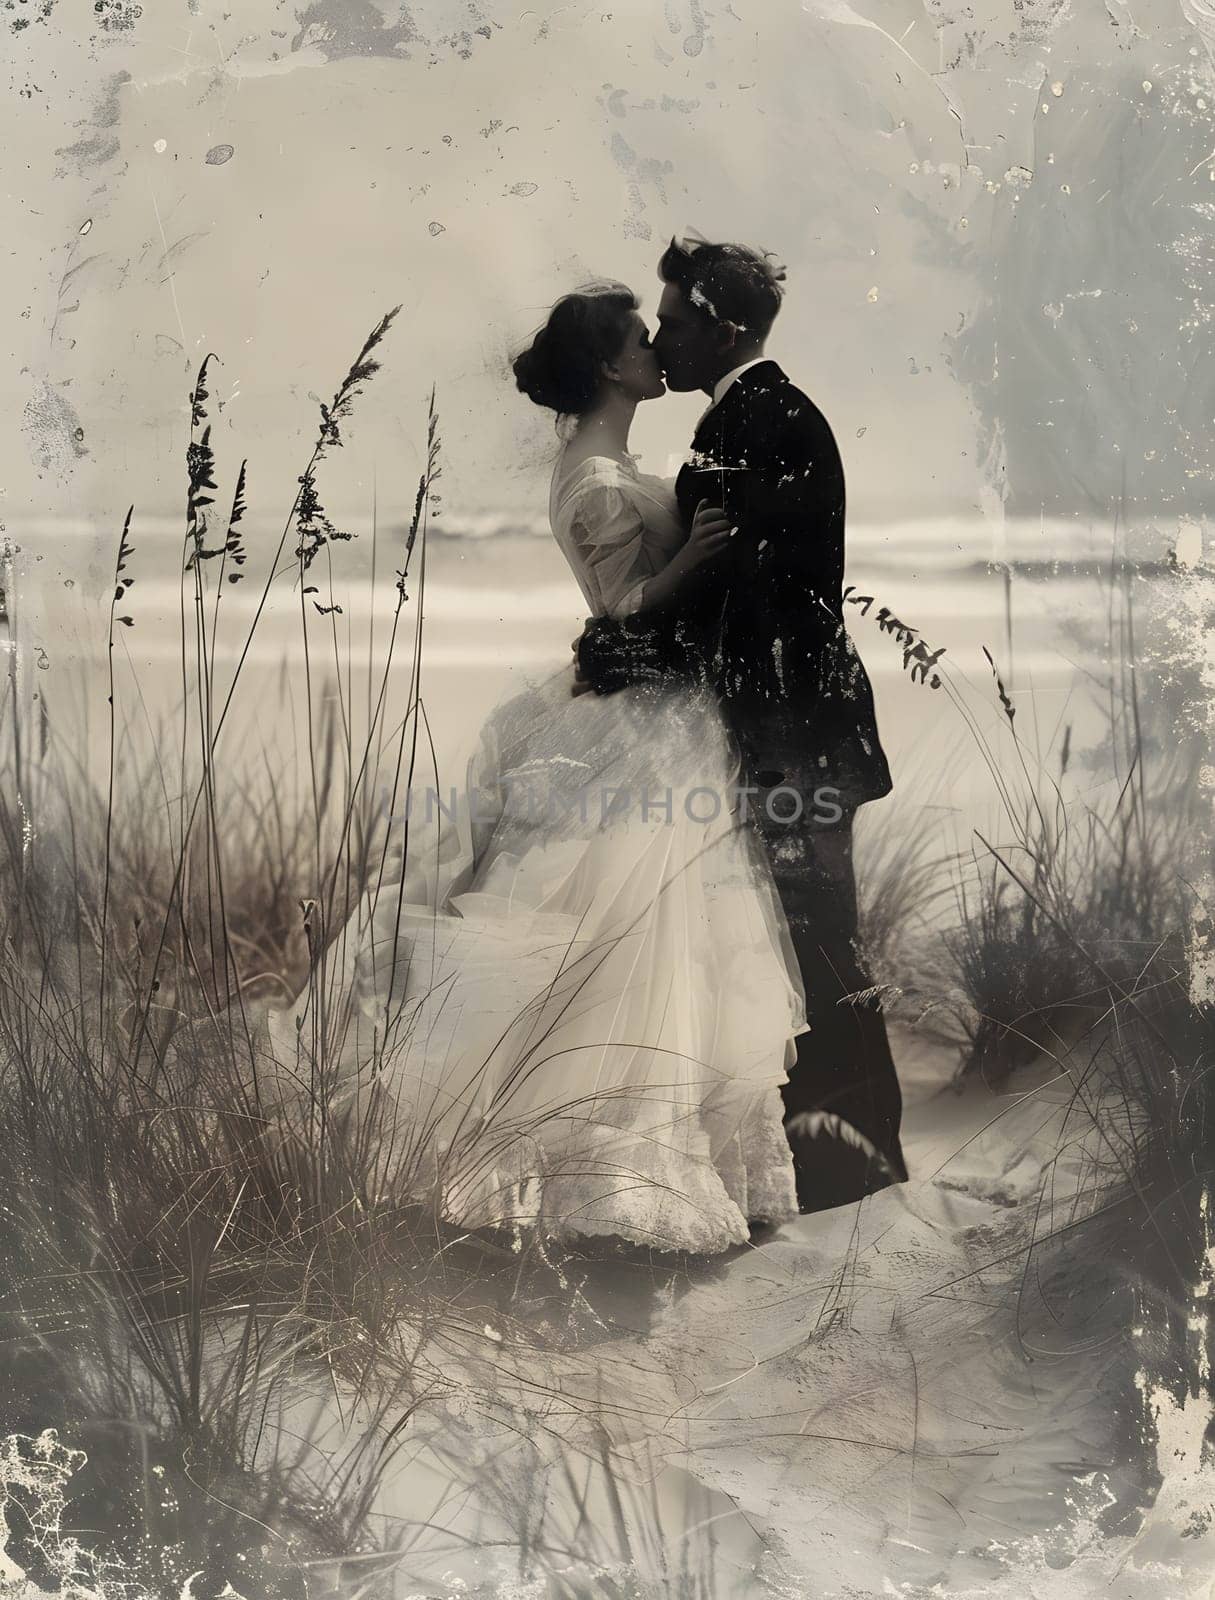 Vintage gown, formal wear, kissing on beach in monochrome photo by Nadtochiy